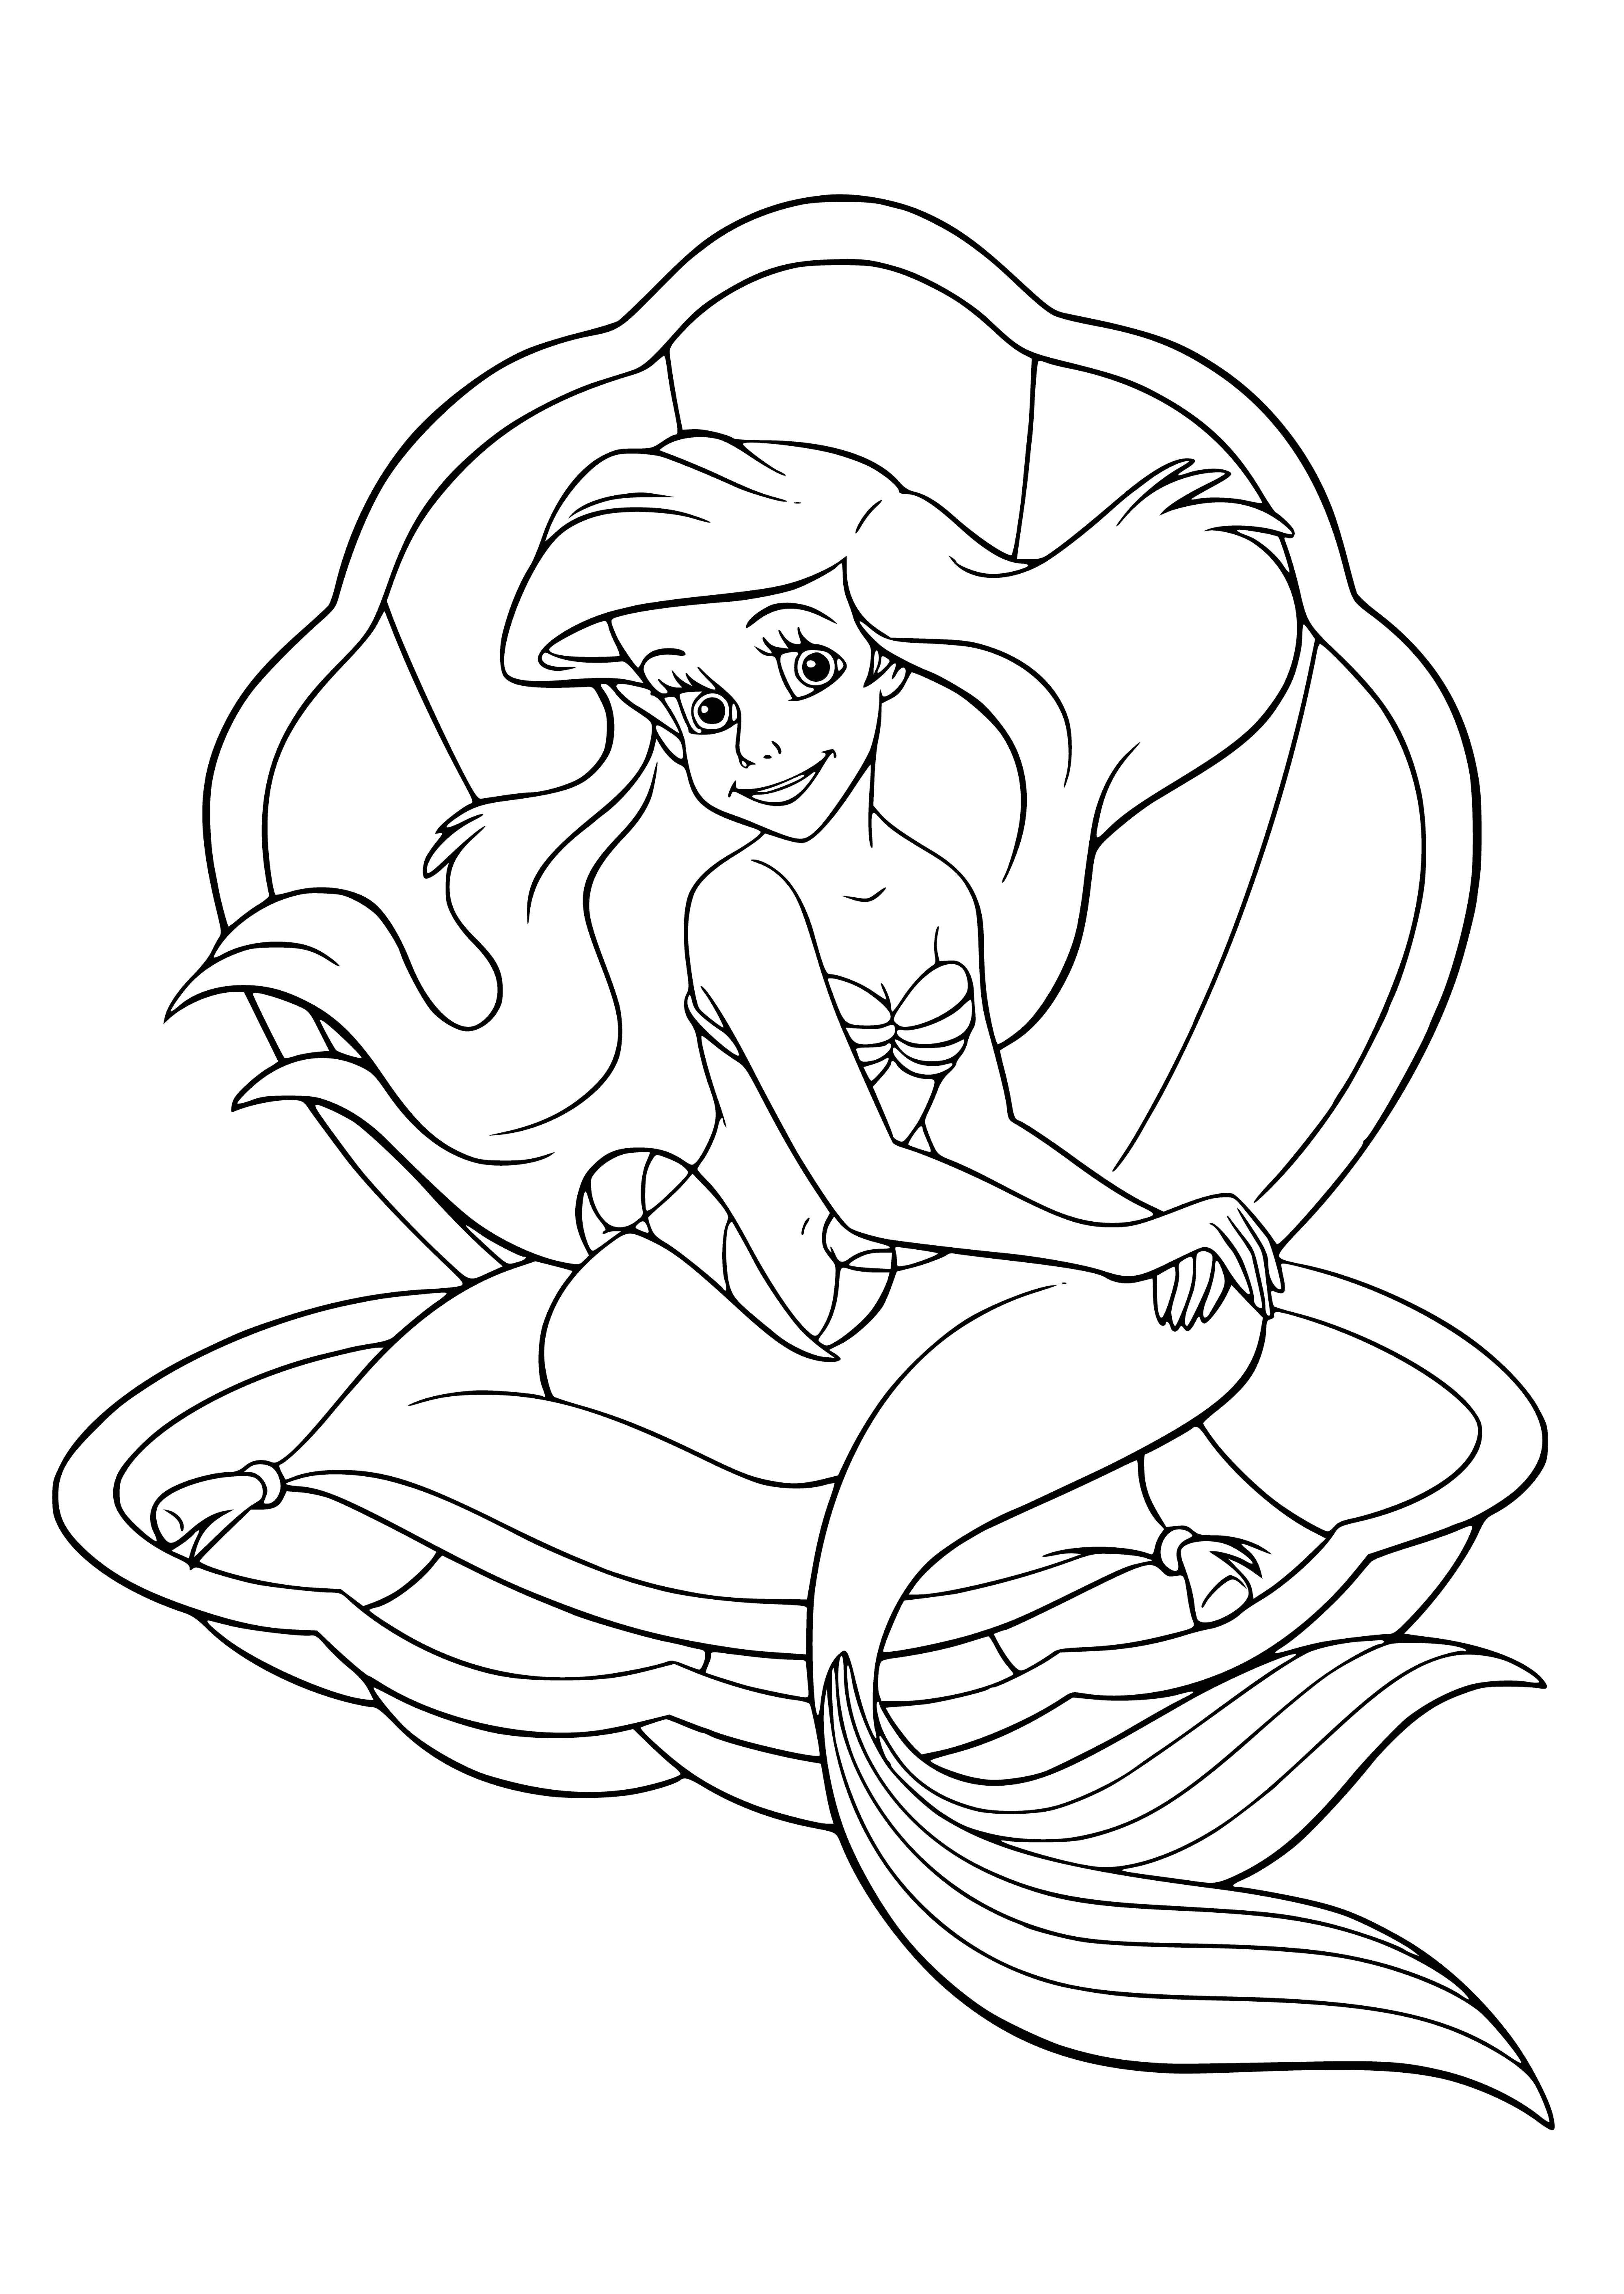 coloring page: A little mermaid is scrubbing the sink with a sponge and curling her red hair with a blue headband - her blue tail wrapped around her waist.